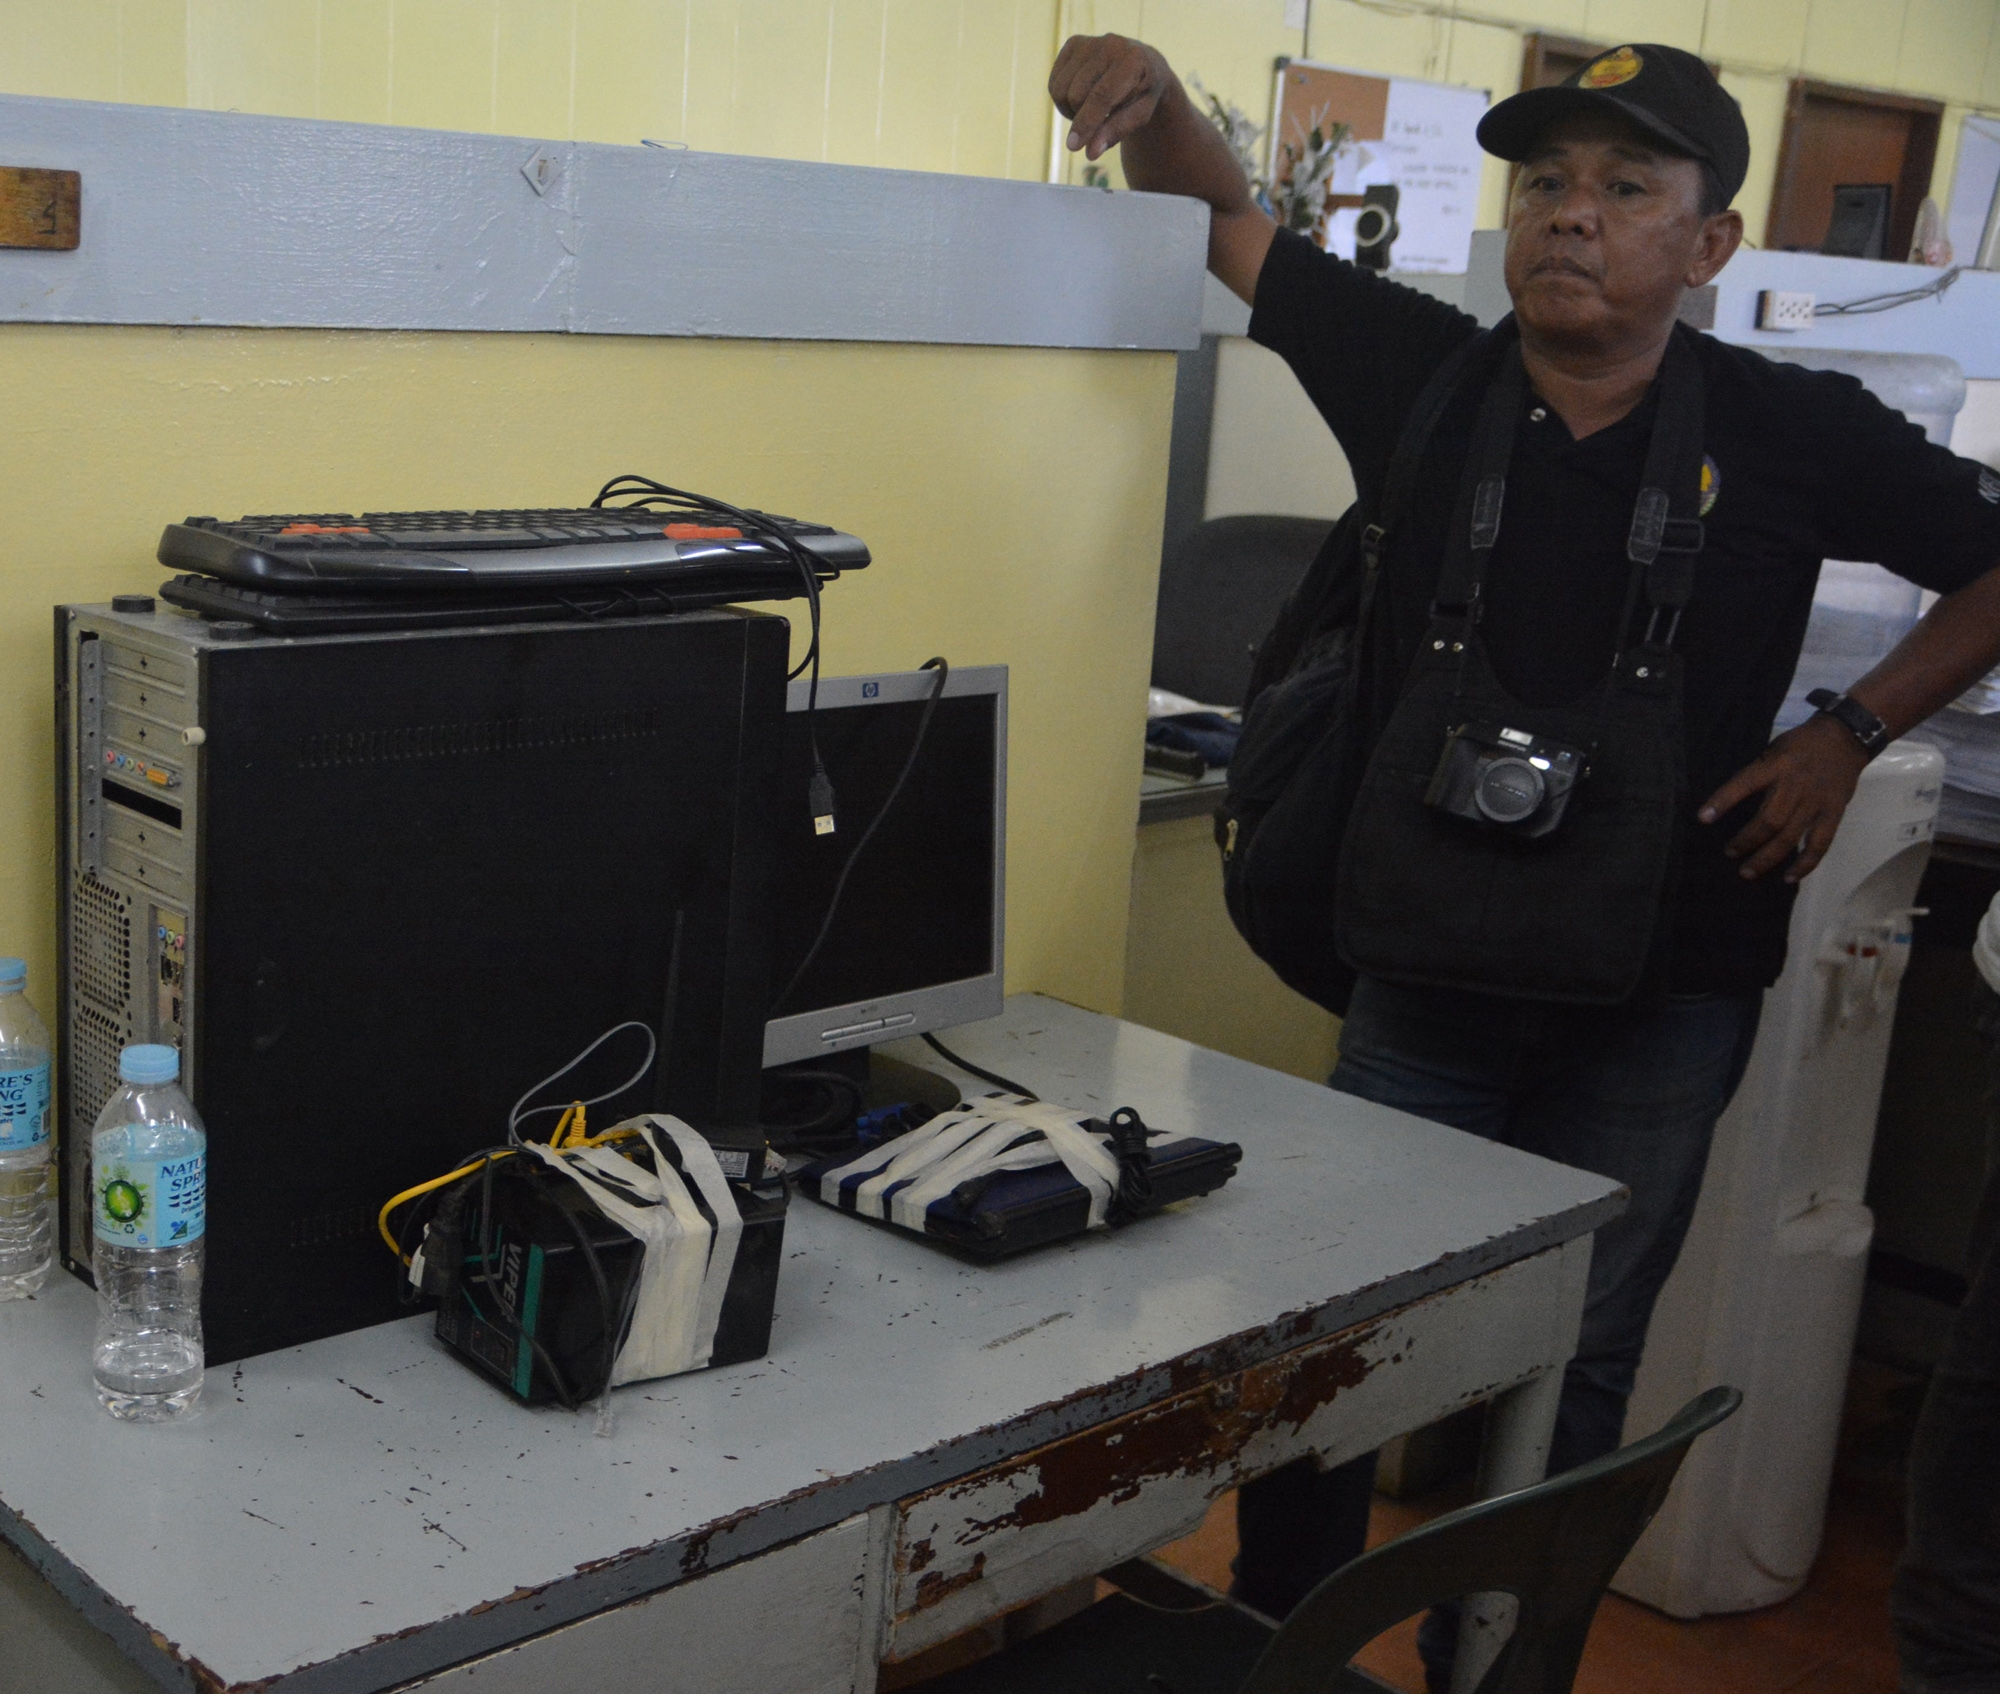 An NBI Operative watches over the Computer Unit confiscated at the house of Editha Aying in Soong, Lapu-Lapu City. (CDN PHOTO/CHRISTIAN MANINGO)